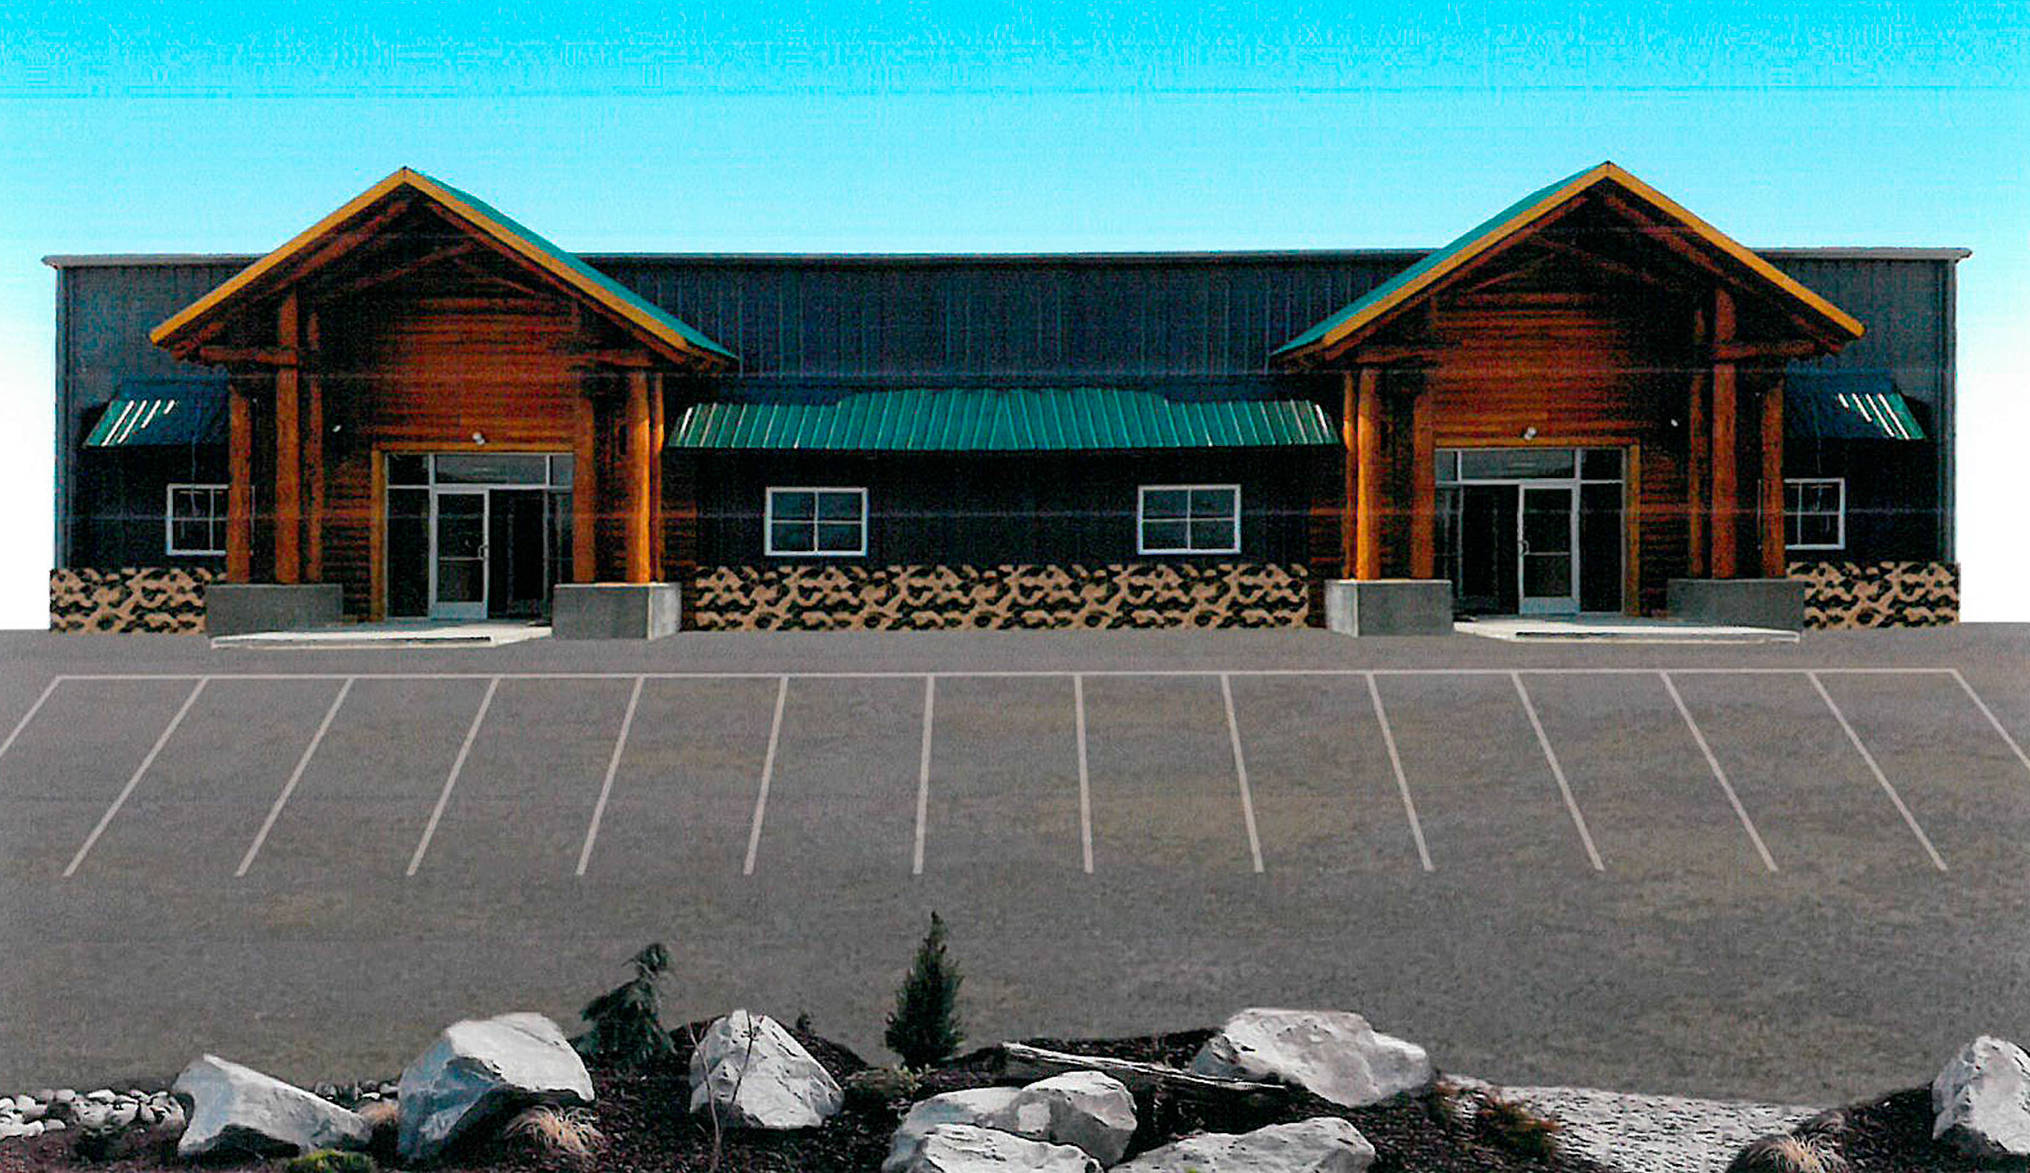 Shipley Center looks to add 3,600-square-foot annex as stop-gap for bigger Sequim facility